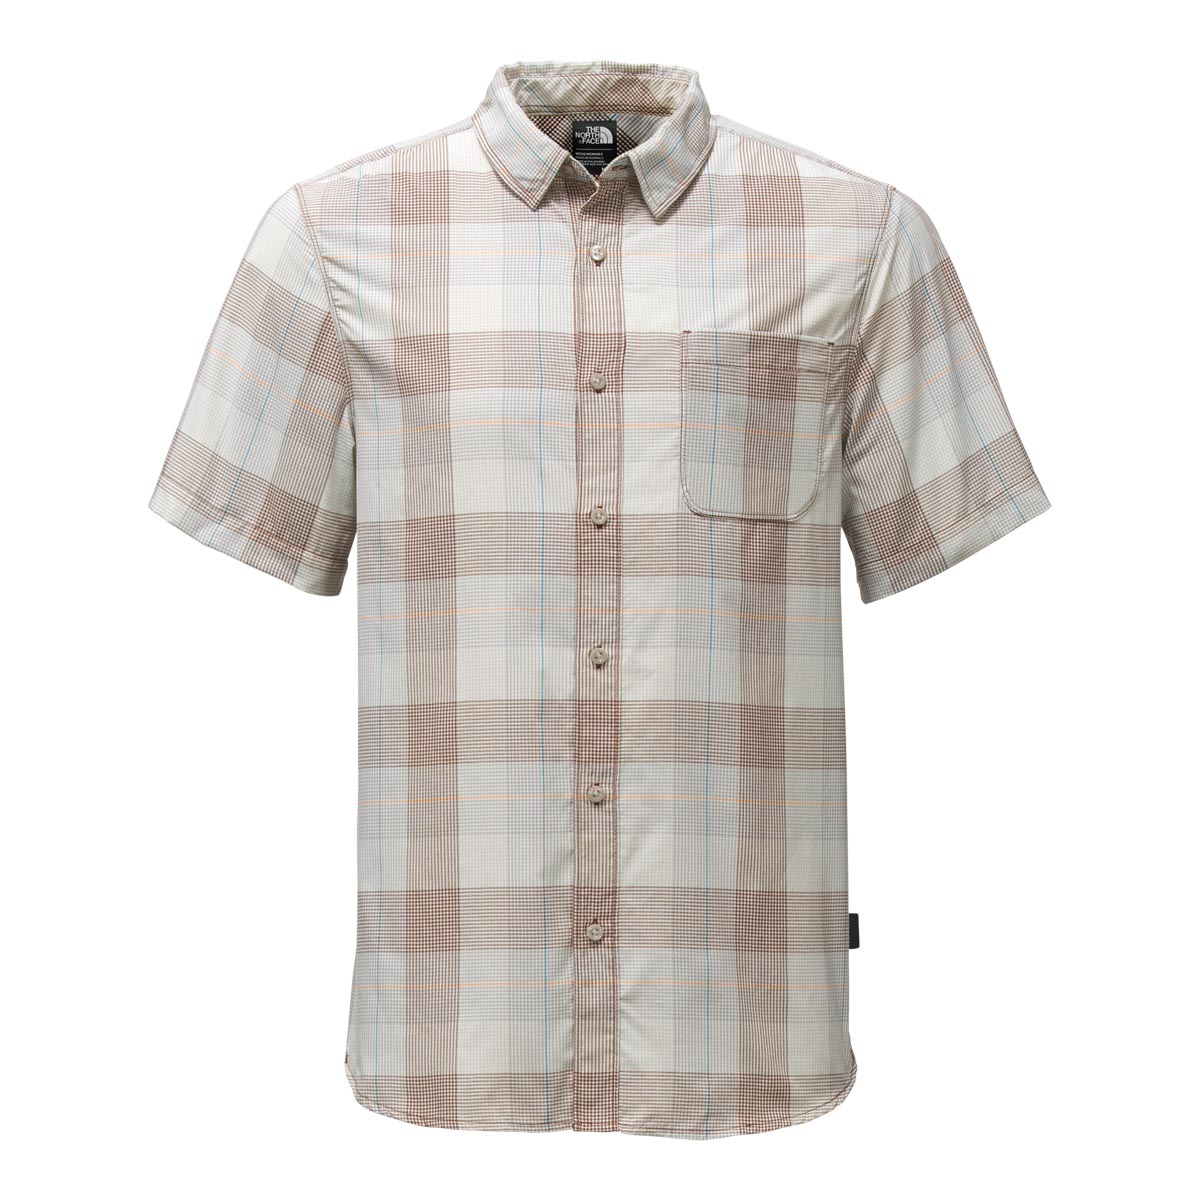 The North Face Mens Short Sleeve Expedition Shirt